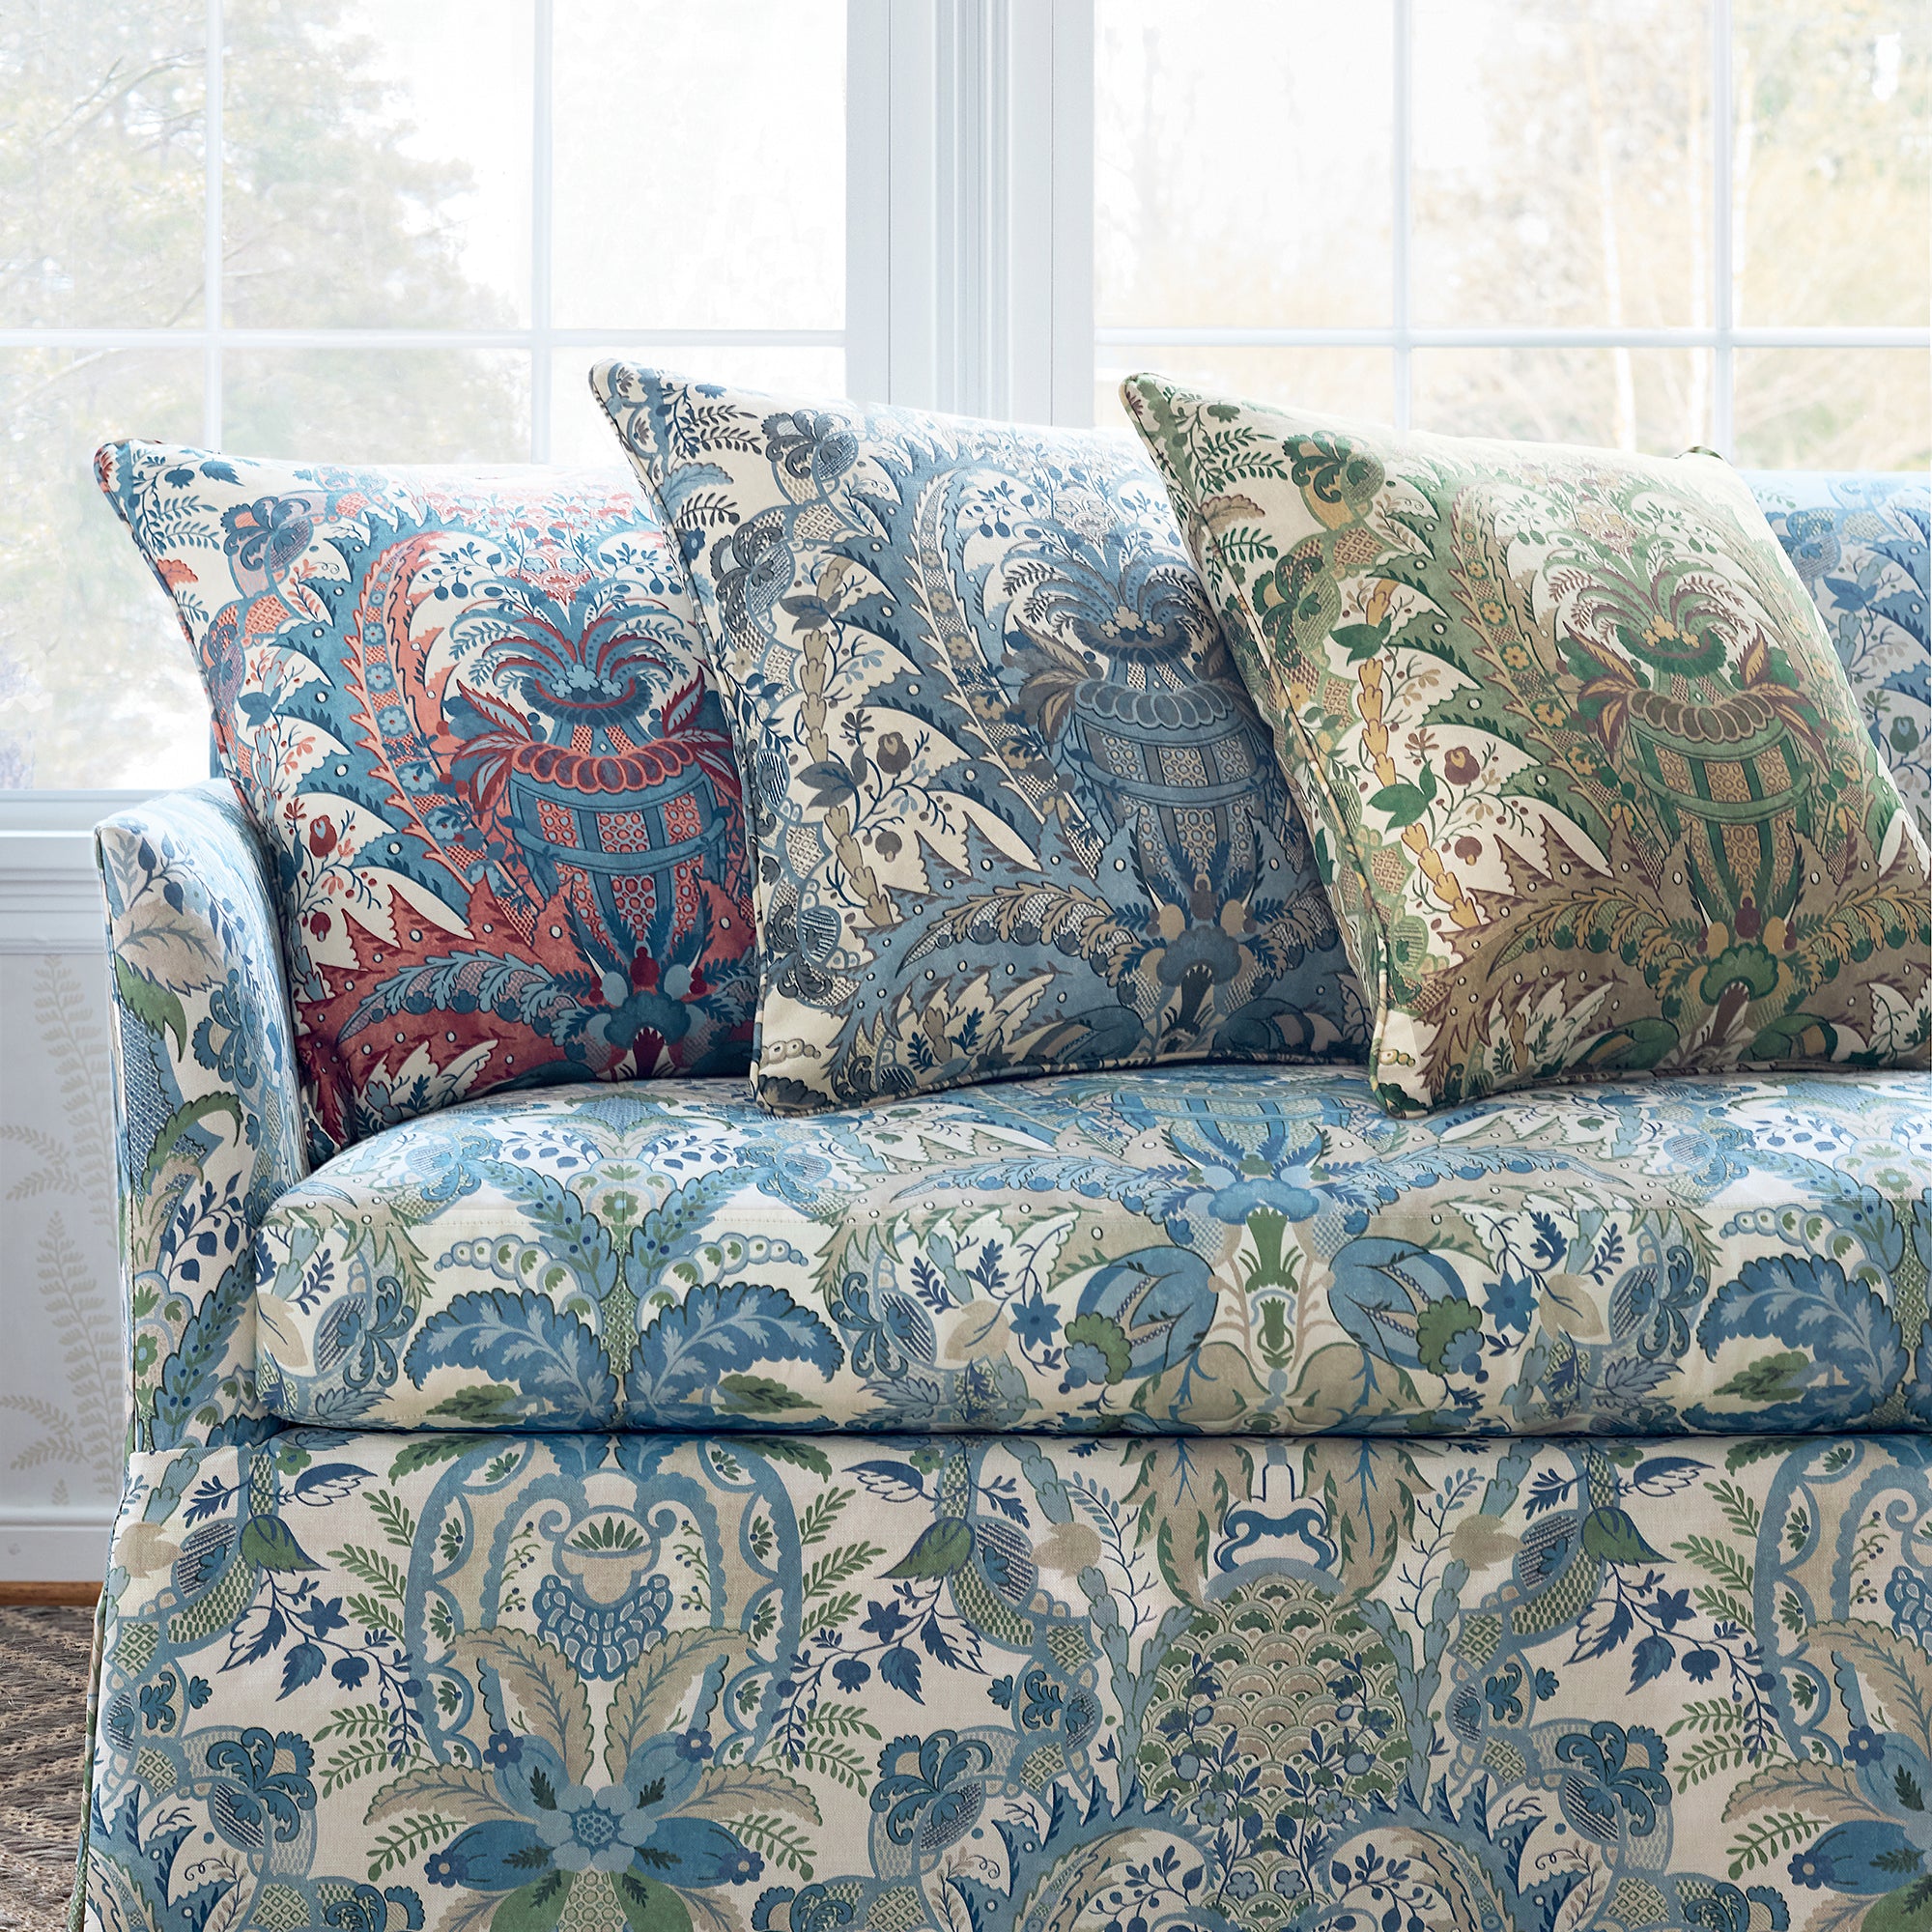 Collection of addison sofa with skirt and pillow fabrics in Narbeth printed fabric featuring red and blue color fabric - pattern number AF57861 - by Anna French in the Bristol collection